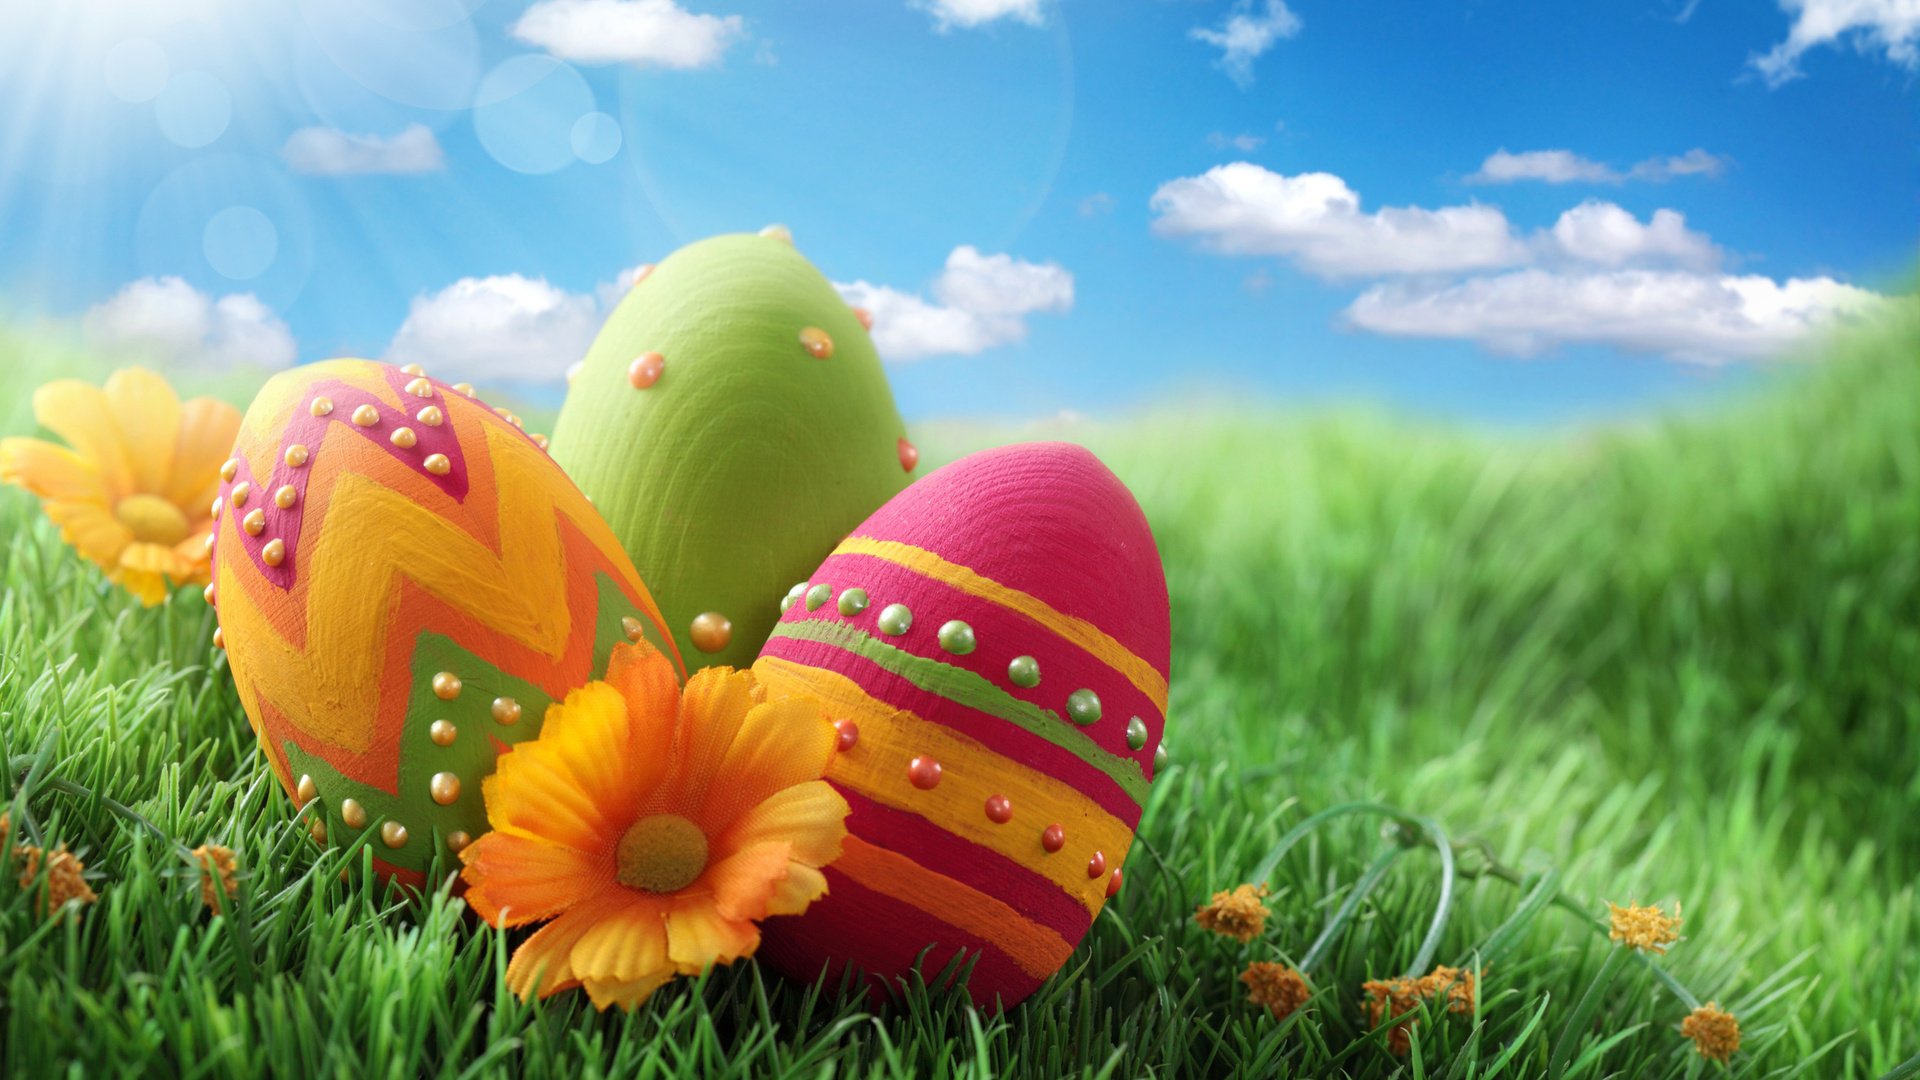  easter wallpapers category of free hd wallpapers easter wallpaper is